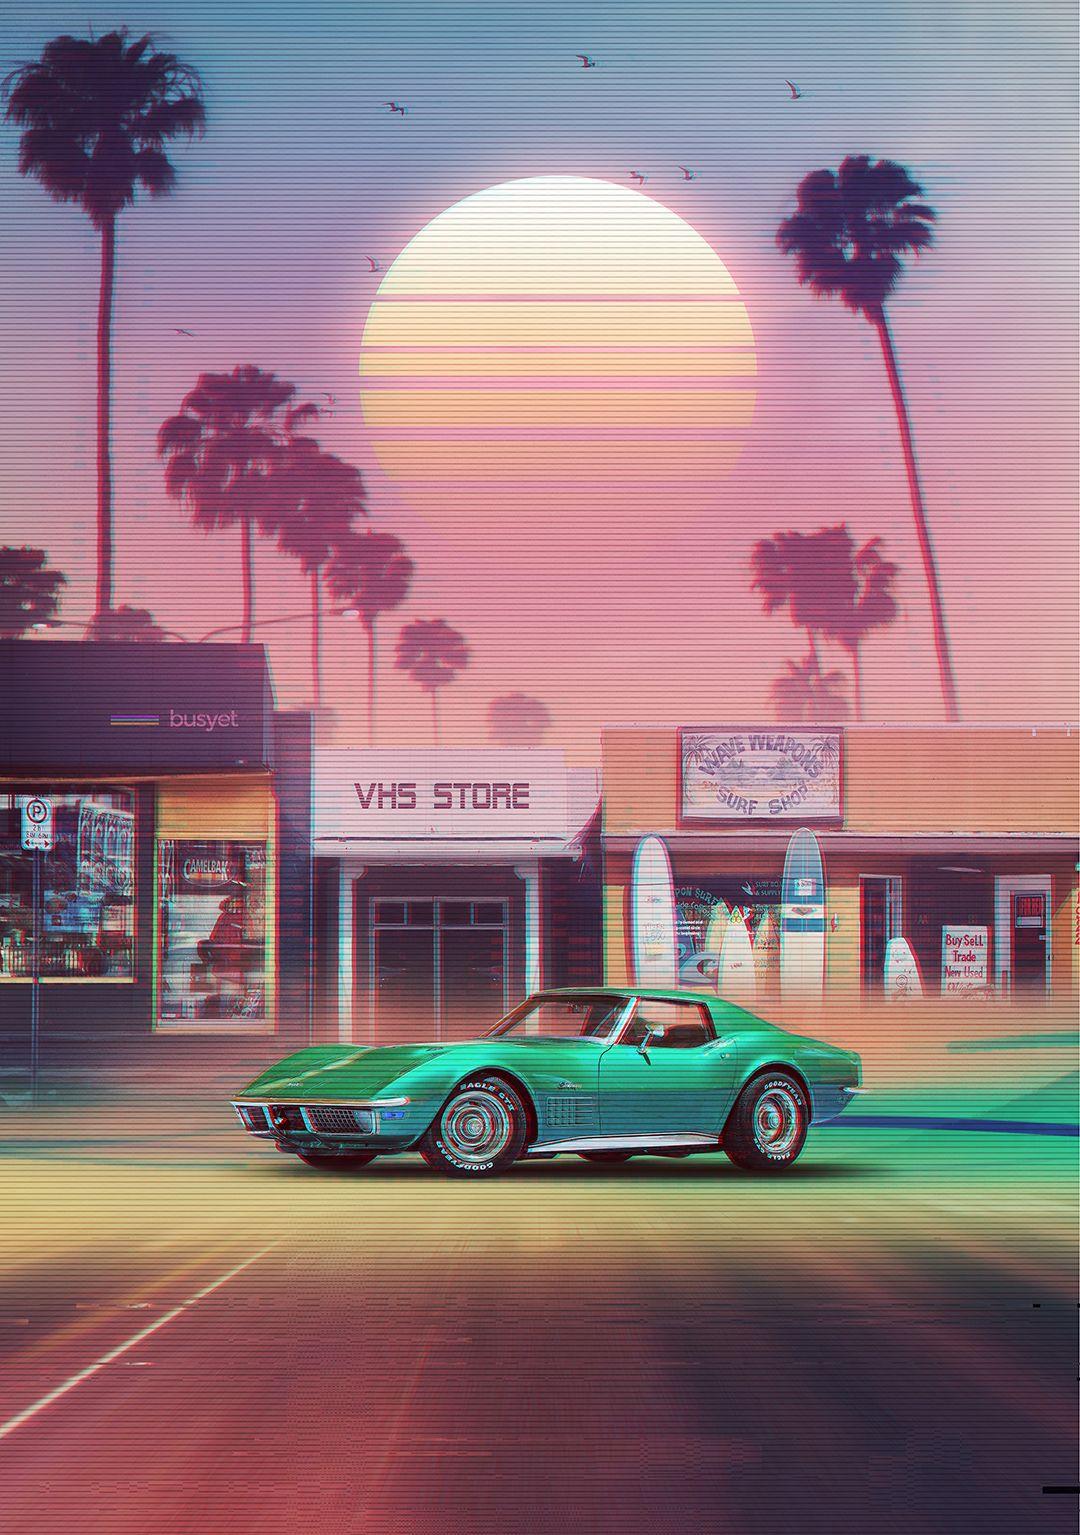 Synthwave Sunset Drive Photographic Print by dennybusyet. Retro futurism, Vaporwave, 80s aesthetic